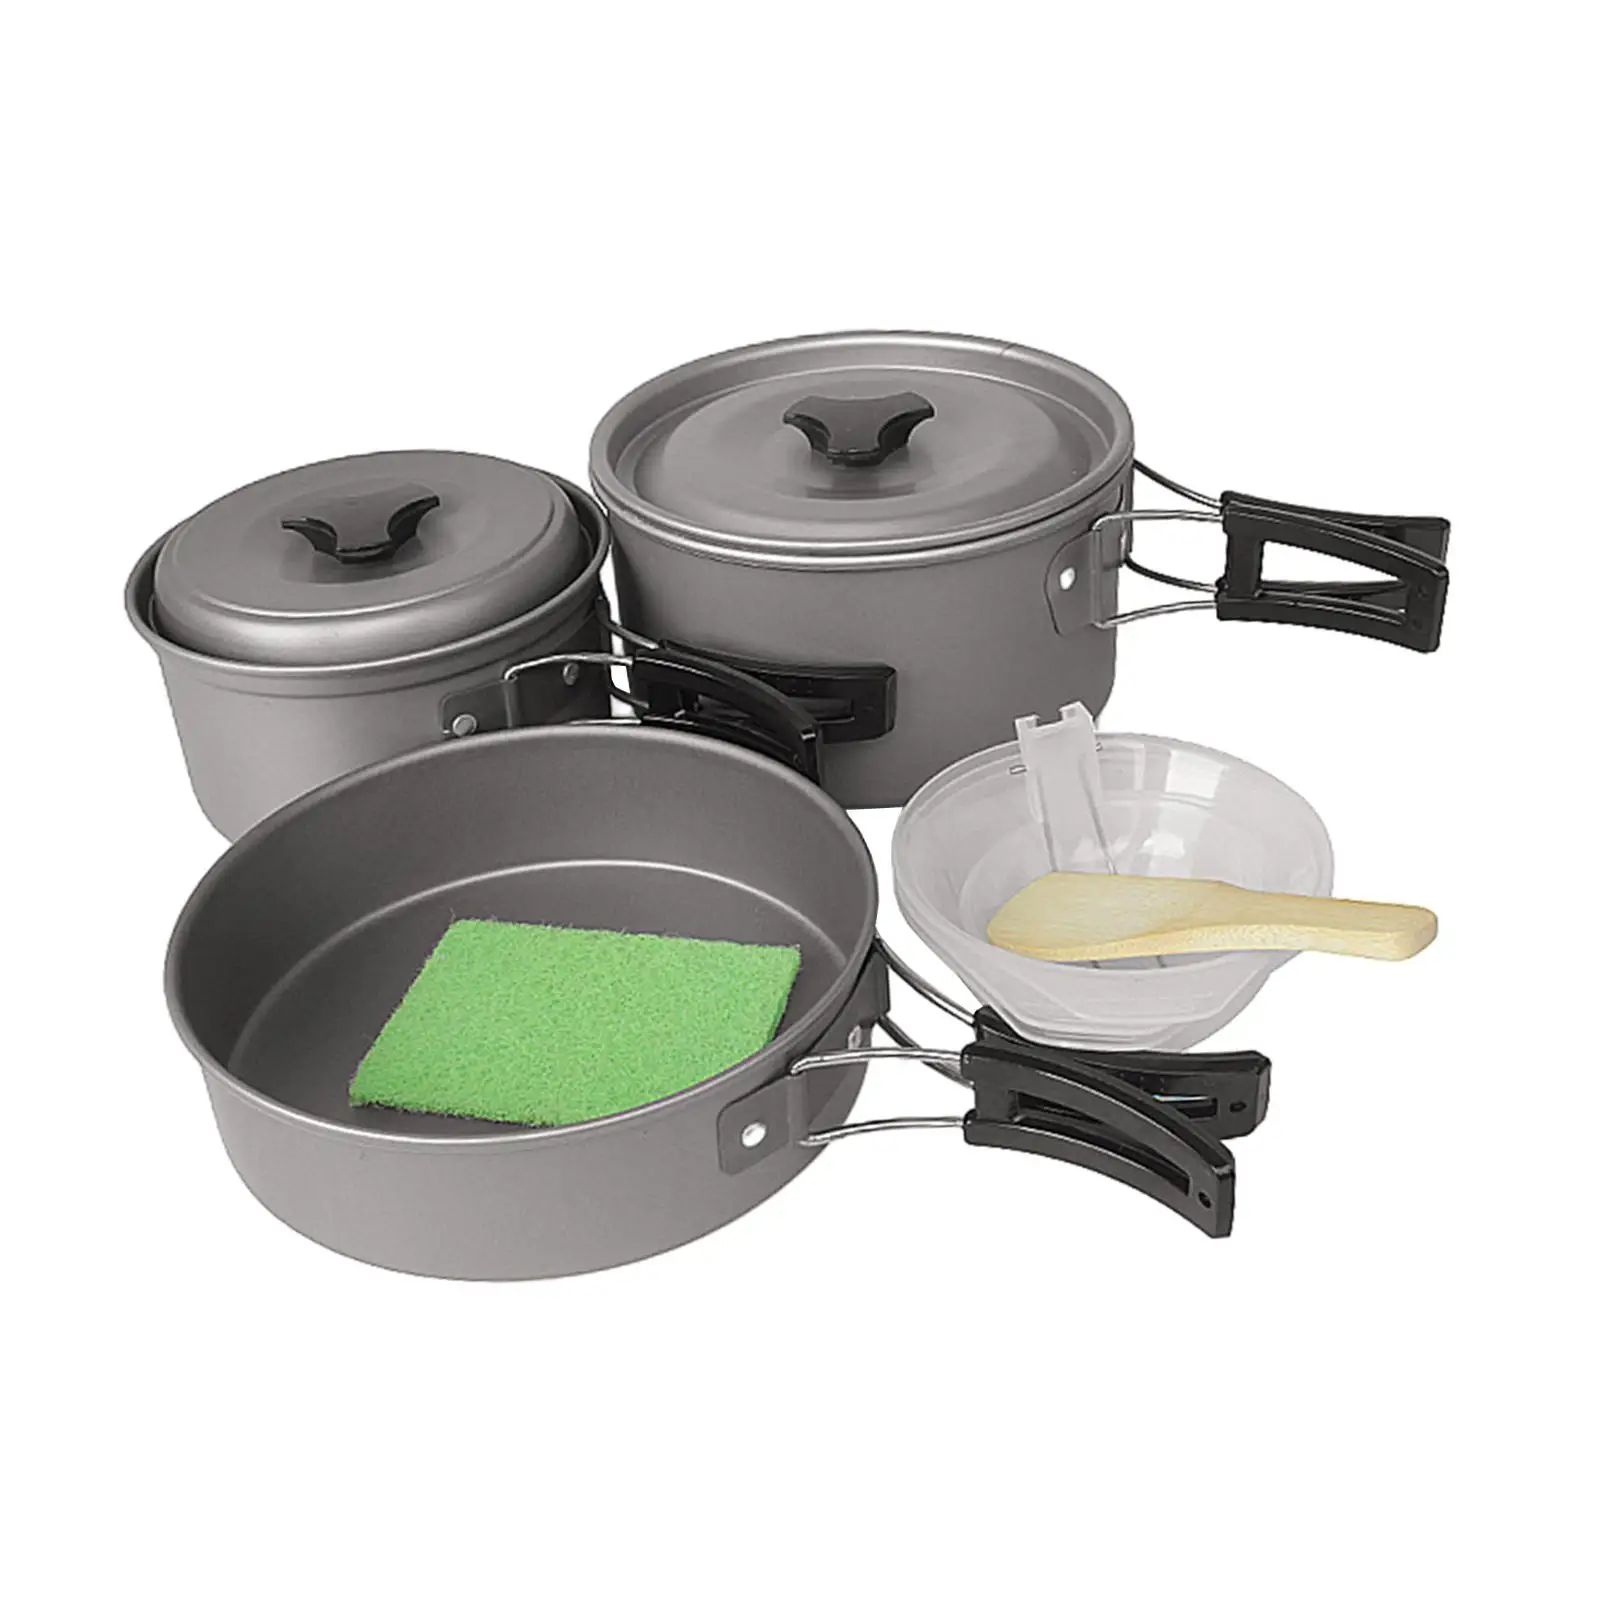 Camping Cookware Set Easy to Clean Included Mesh Carry Bag Lightweight Durable Aluminum Alloy Cooking Gear Equipment Gear